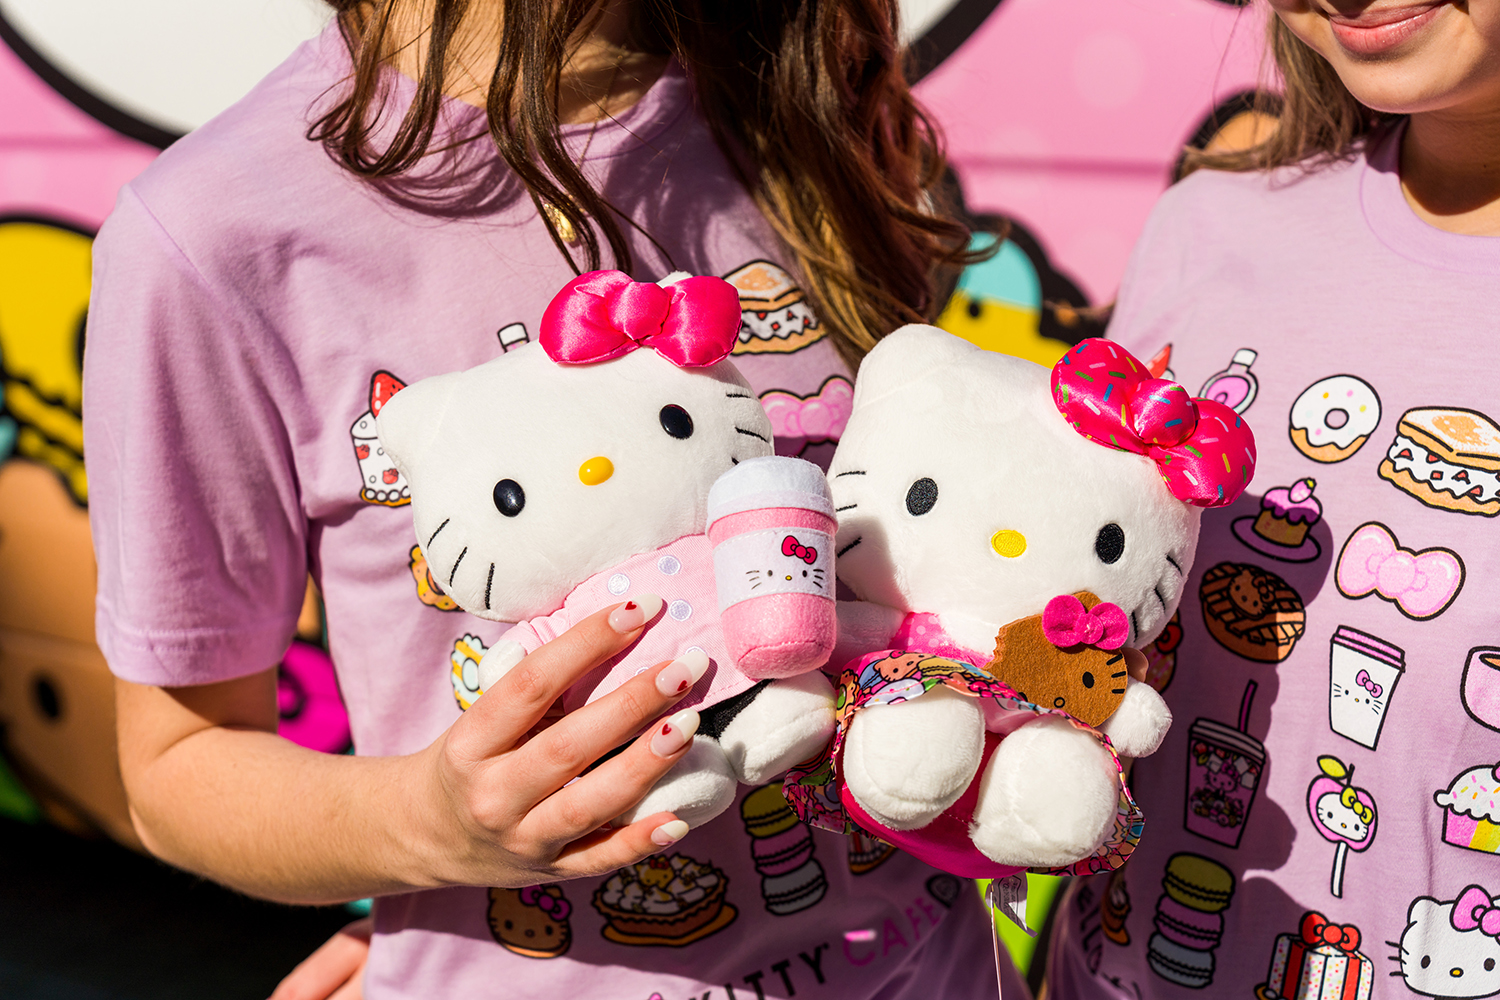 Hello Kitty Cafe at Fashion Show mall debuts, Food